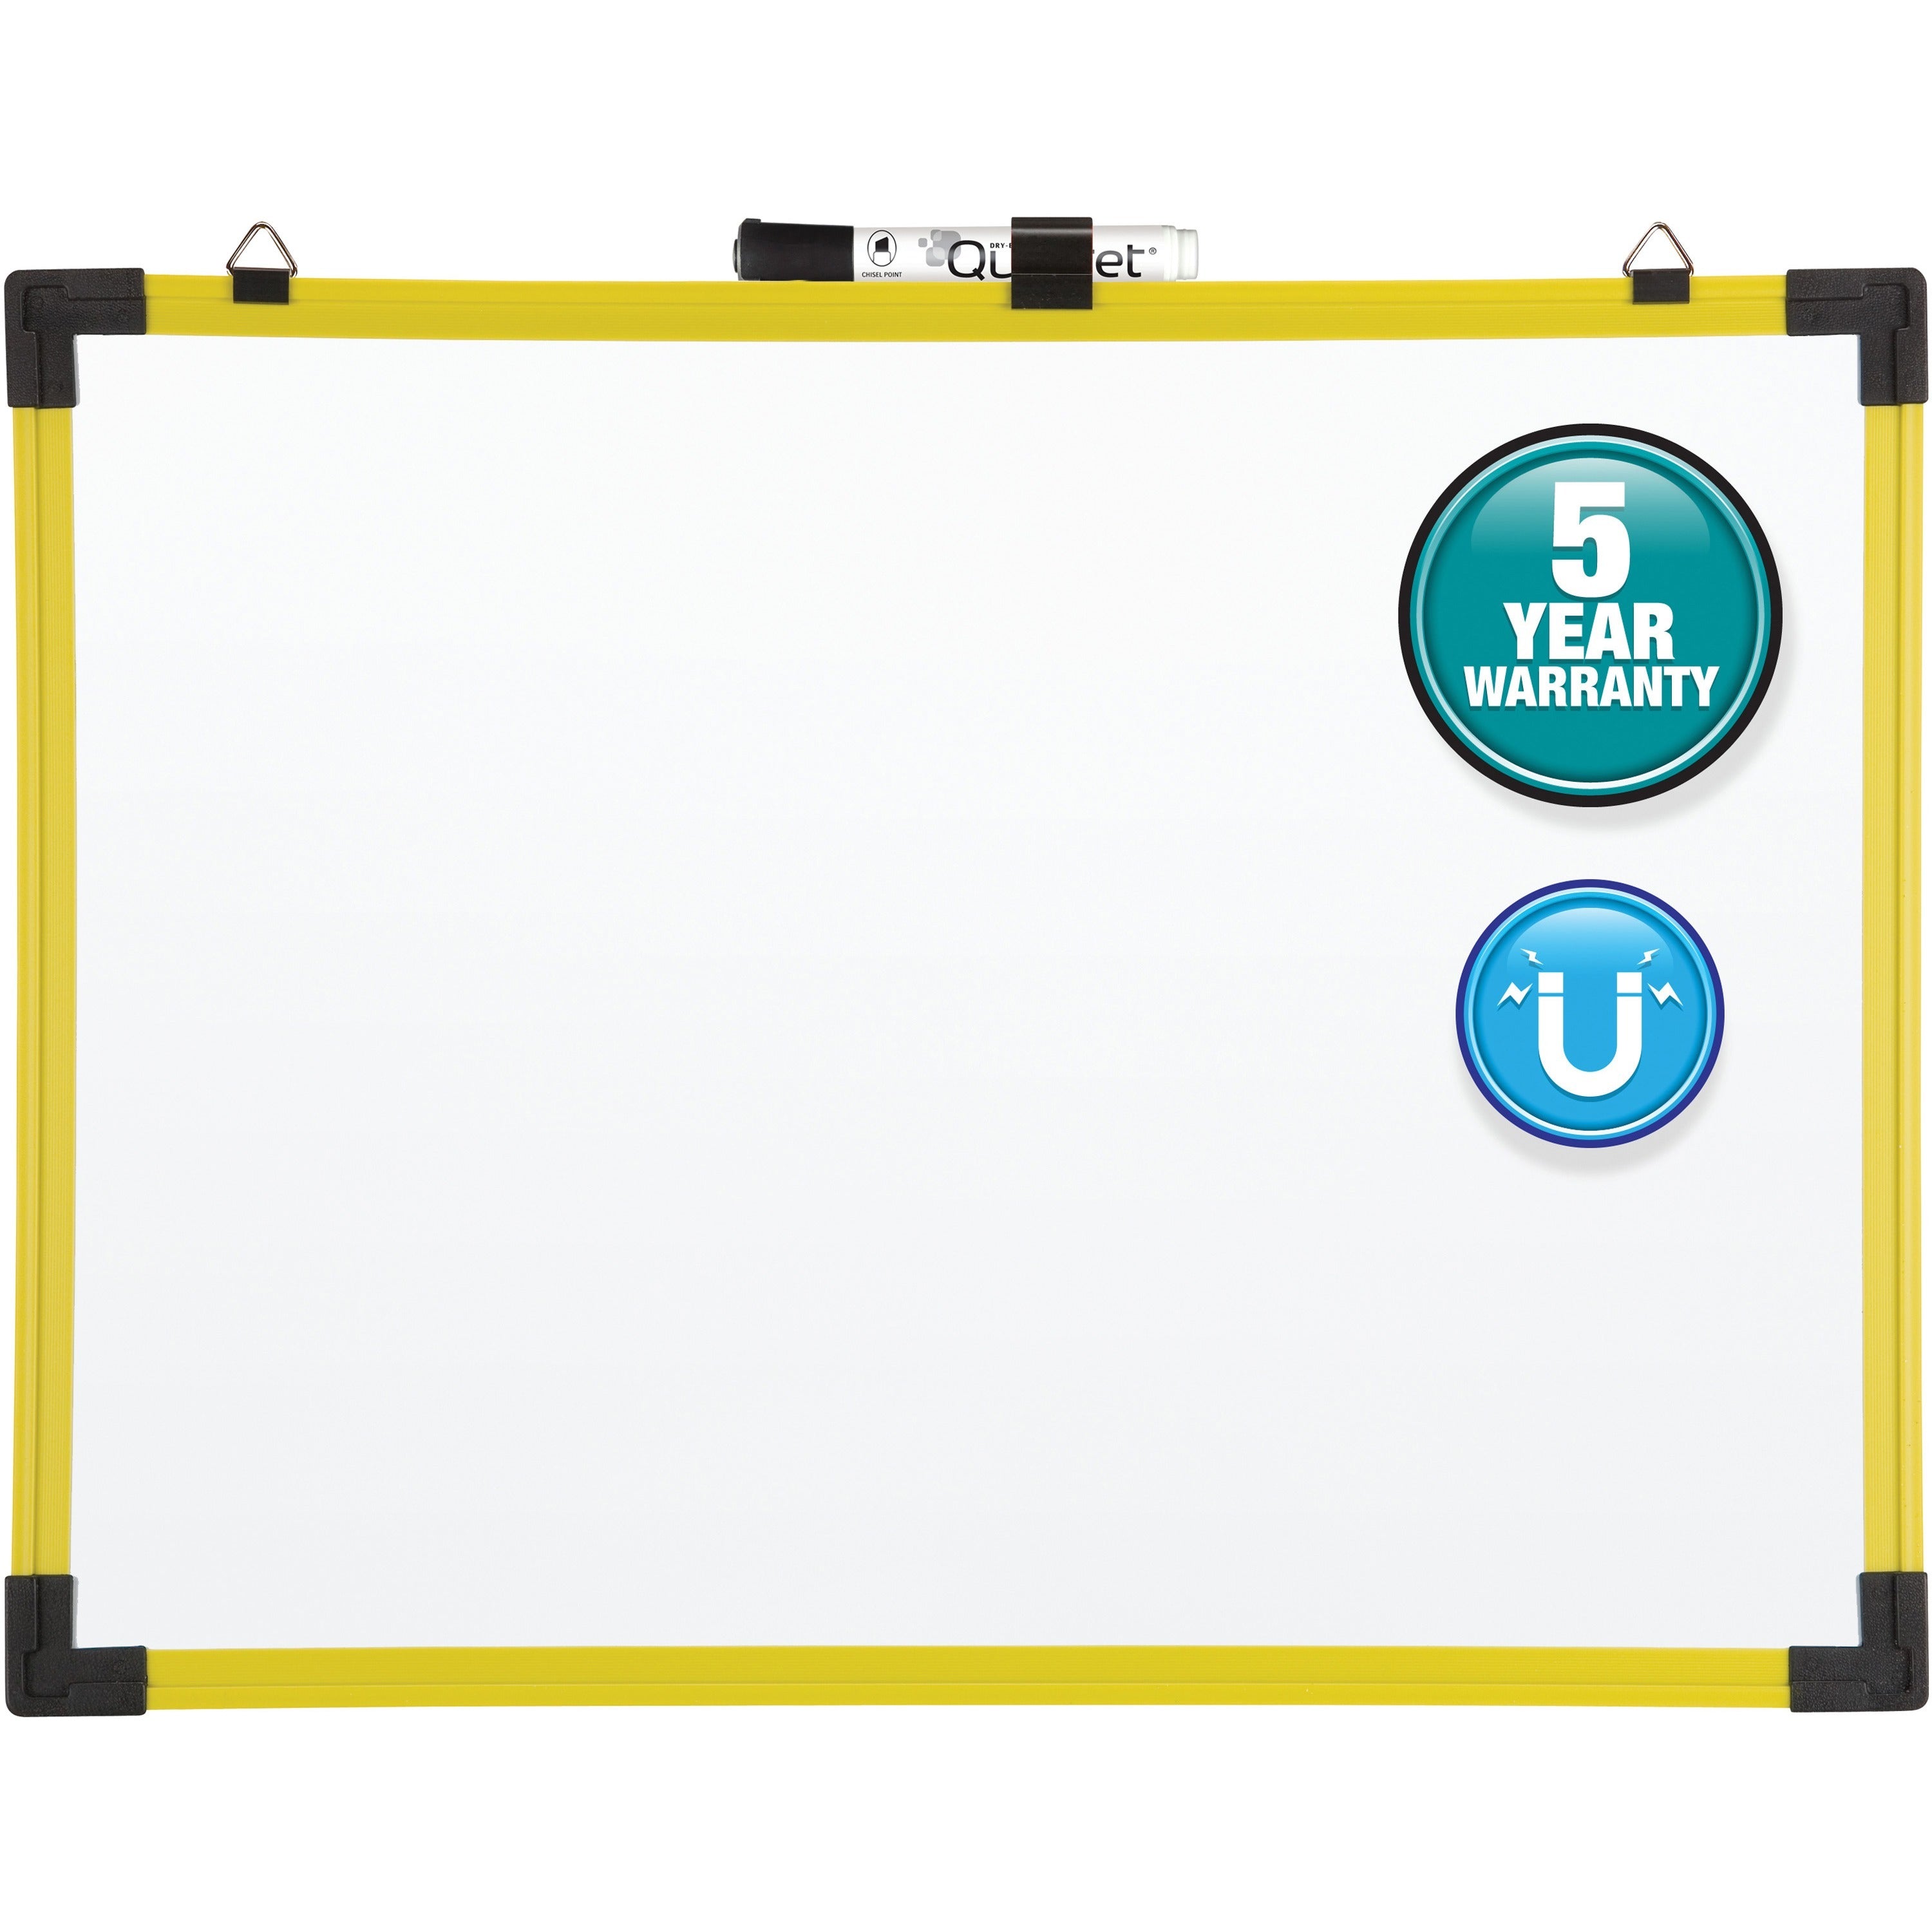 quartet-industrial-magnetic-whiteboard-72-6-ft-width-x-48-4-ft-height-white-painted-steel-surface-bright-yellow-aluminum-frame-rectangle-horizontal-magnetic-1-each_qrt724127 - 1